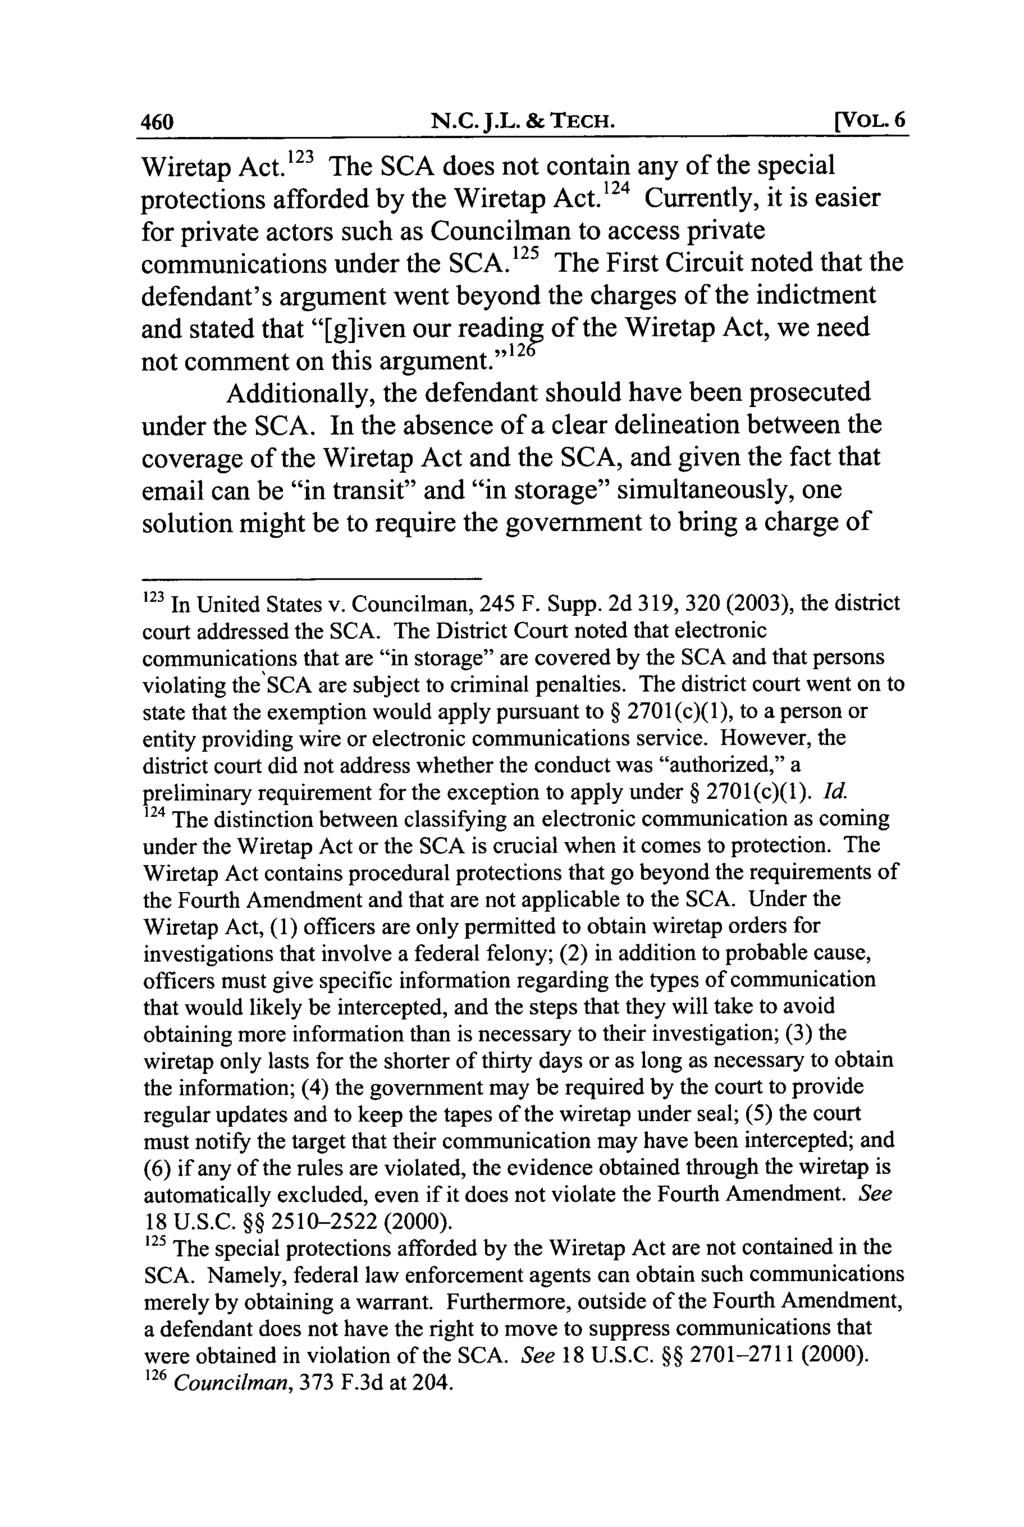 N.C. J.L. & TECH. [VOL. 6 Wiretap Act. 12 3 The SCA does not contain any of the special protections afforded by the Wiretap Act.